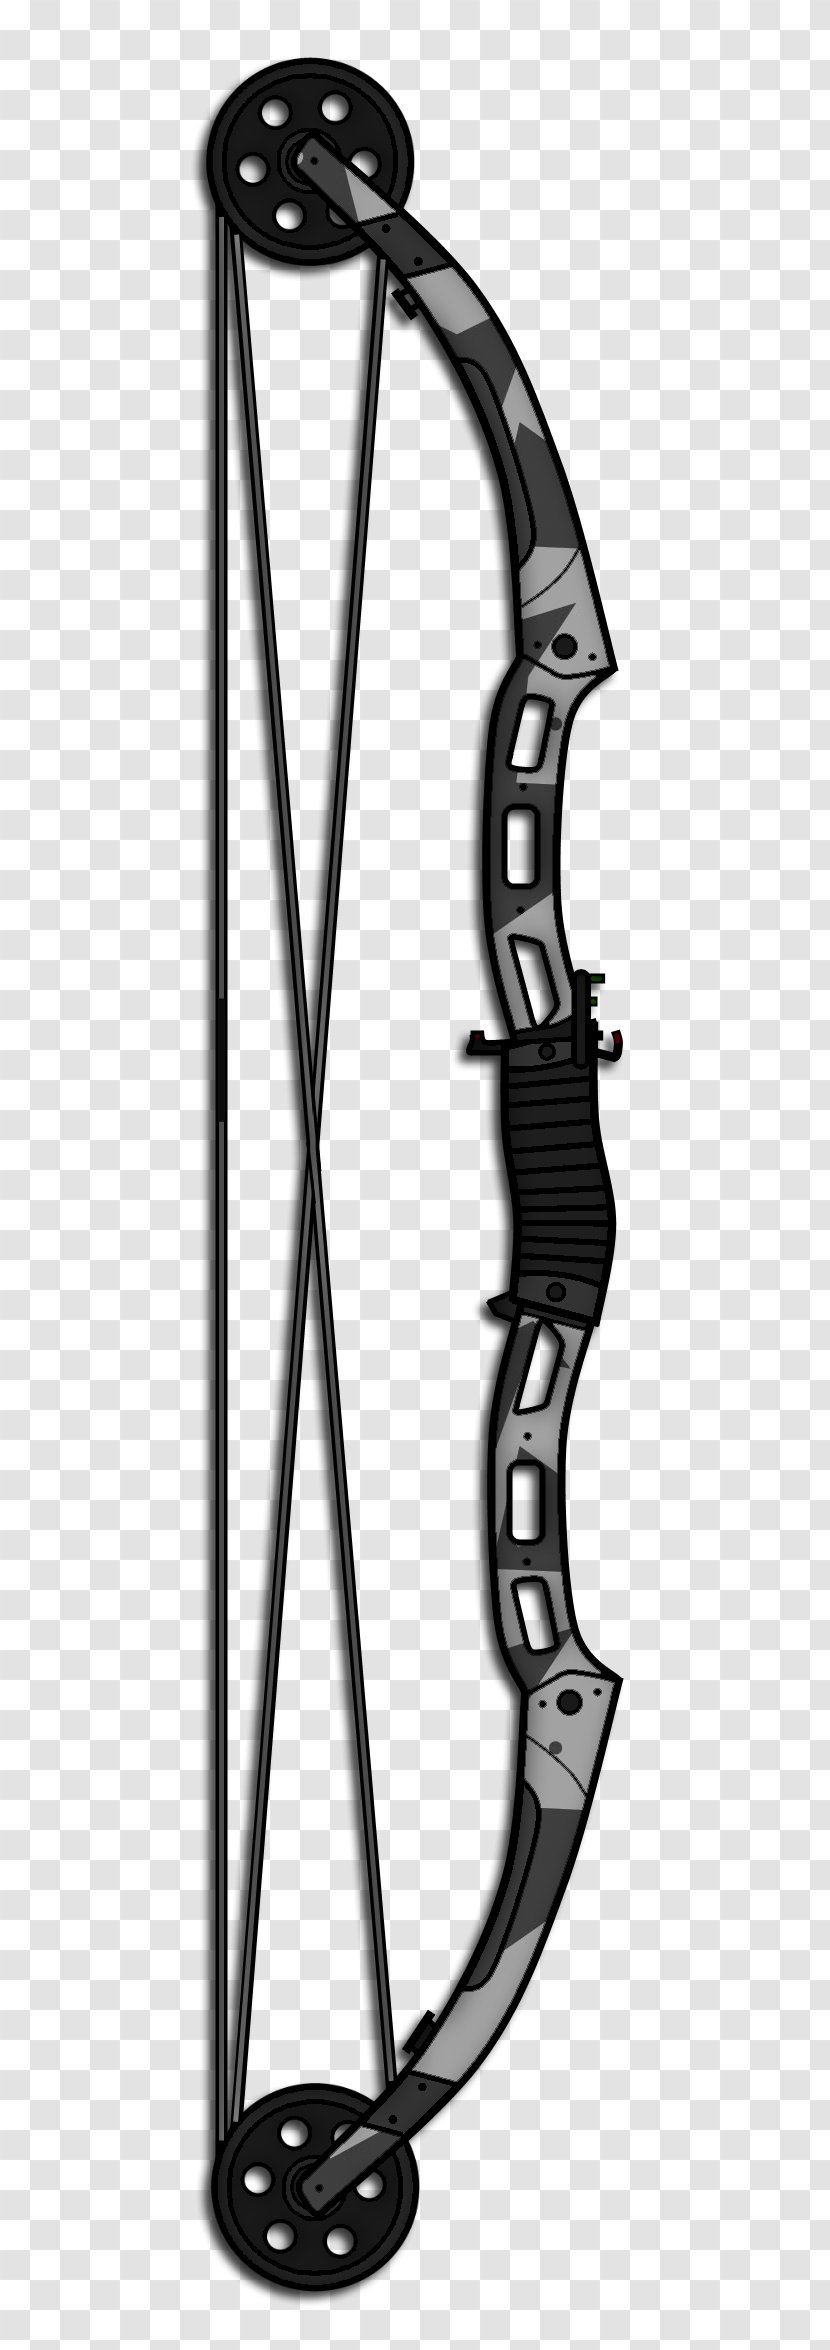 Bow And Arrow Compound Bows Archery Recurve Longbow Transparent PNG